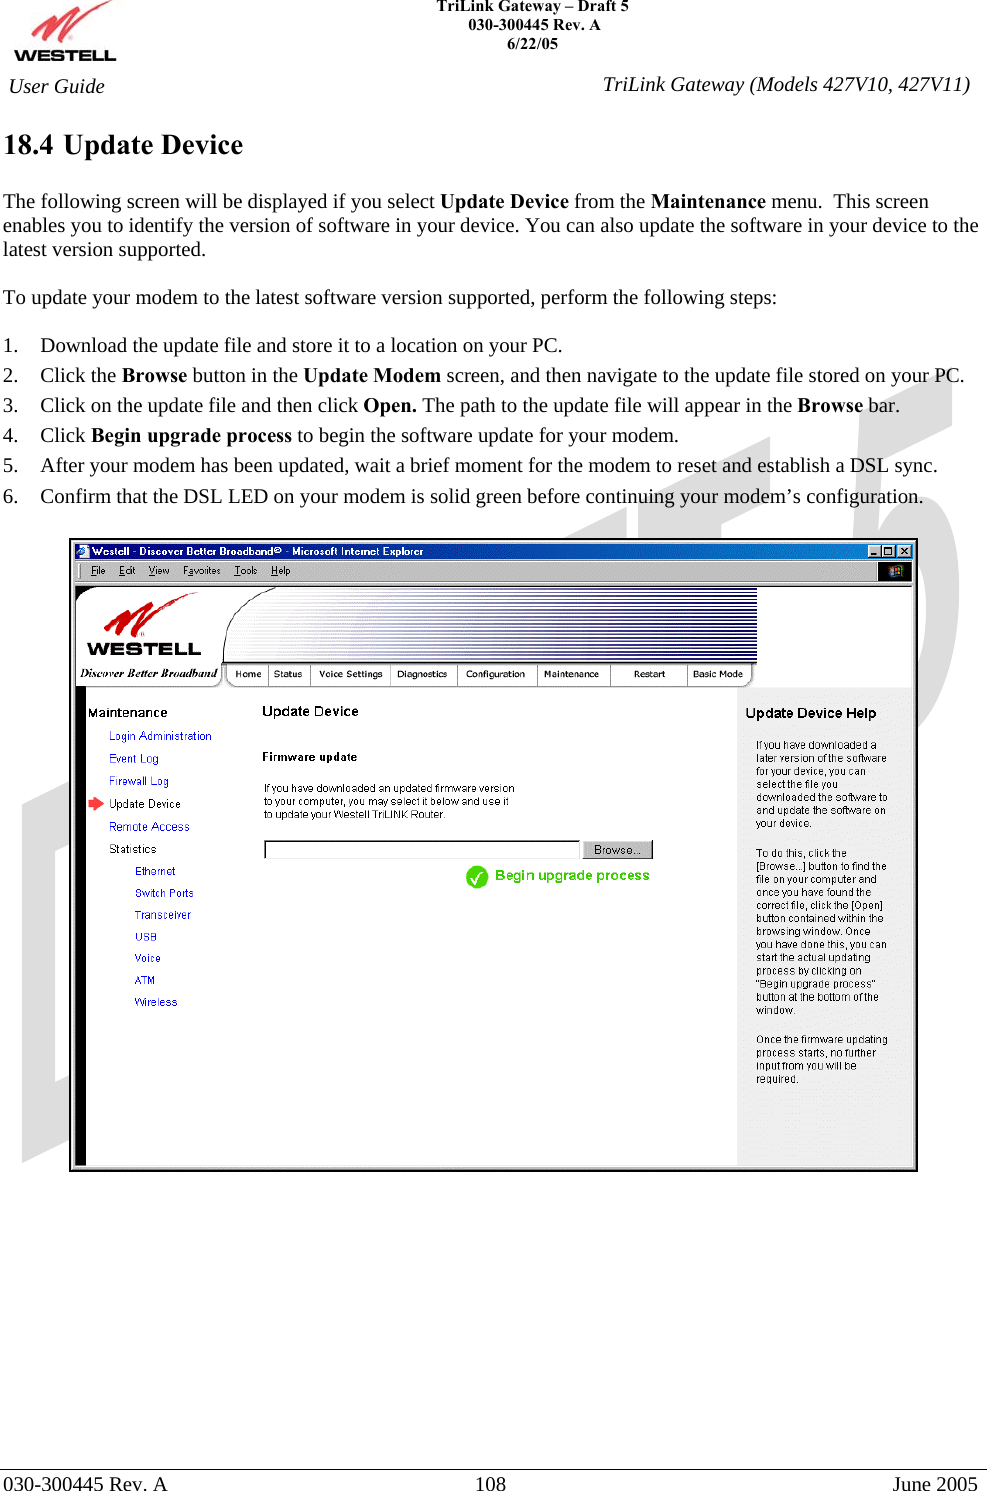    TriLink Gateway – Draft 5   030-300445 Rev. A 6/22/05   030-300445 Rev. A  108  June 2005  User Guide  TriLink Gateway (Models 427V10, 427V11)18.4 Update Device  The following screen will be displayed if you select Update Device from the Maintenance menu.  This screen enables you to identify the version of software in your device. You can also update the software in your device to the latest version supported.  To update your modem to the latest software version supported, perform the following steps:  1.  Download the update file and store it to a location on your PC.  2. Click the Browse button in the Update Modem screen, and then navigate to the update file stored on your PC. 3.  Click on the update file and then click Open. The path to the update file will appear in the Browse bar. 4. Click Begin upgrade process to begin the software update for your modem. 5.  After your modem has been updated, wait a brief moment for the modem to reset and establish a DSL sync. 6.  Confirm that the DSL LED on your modem is solid green before continuing your modem’s configuration.              